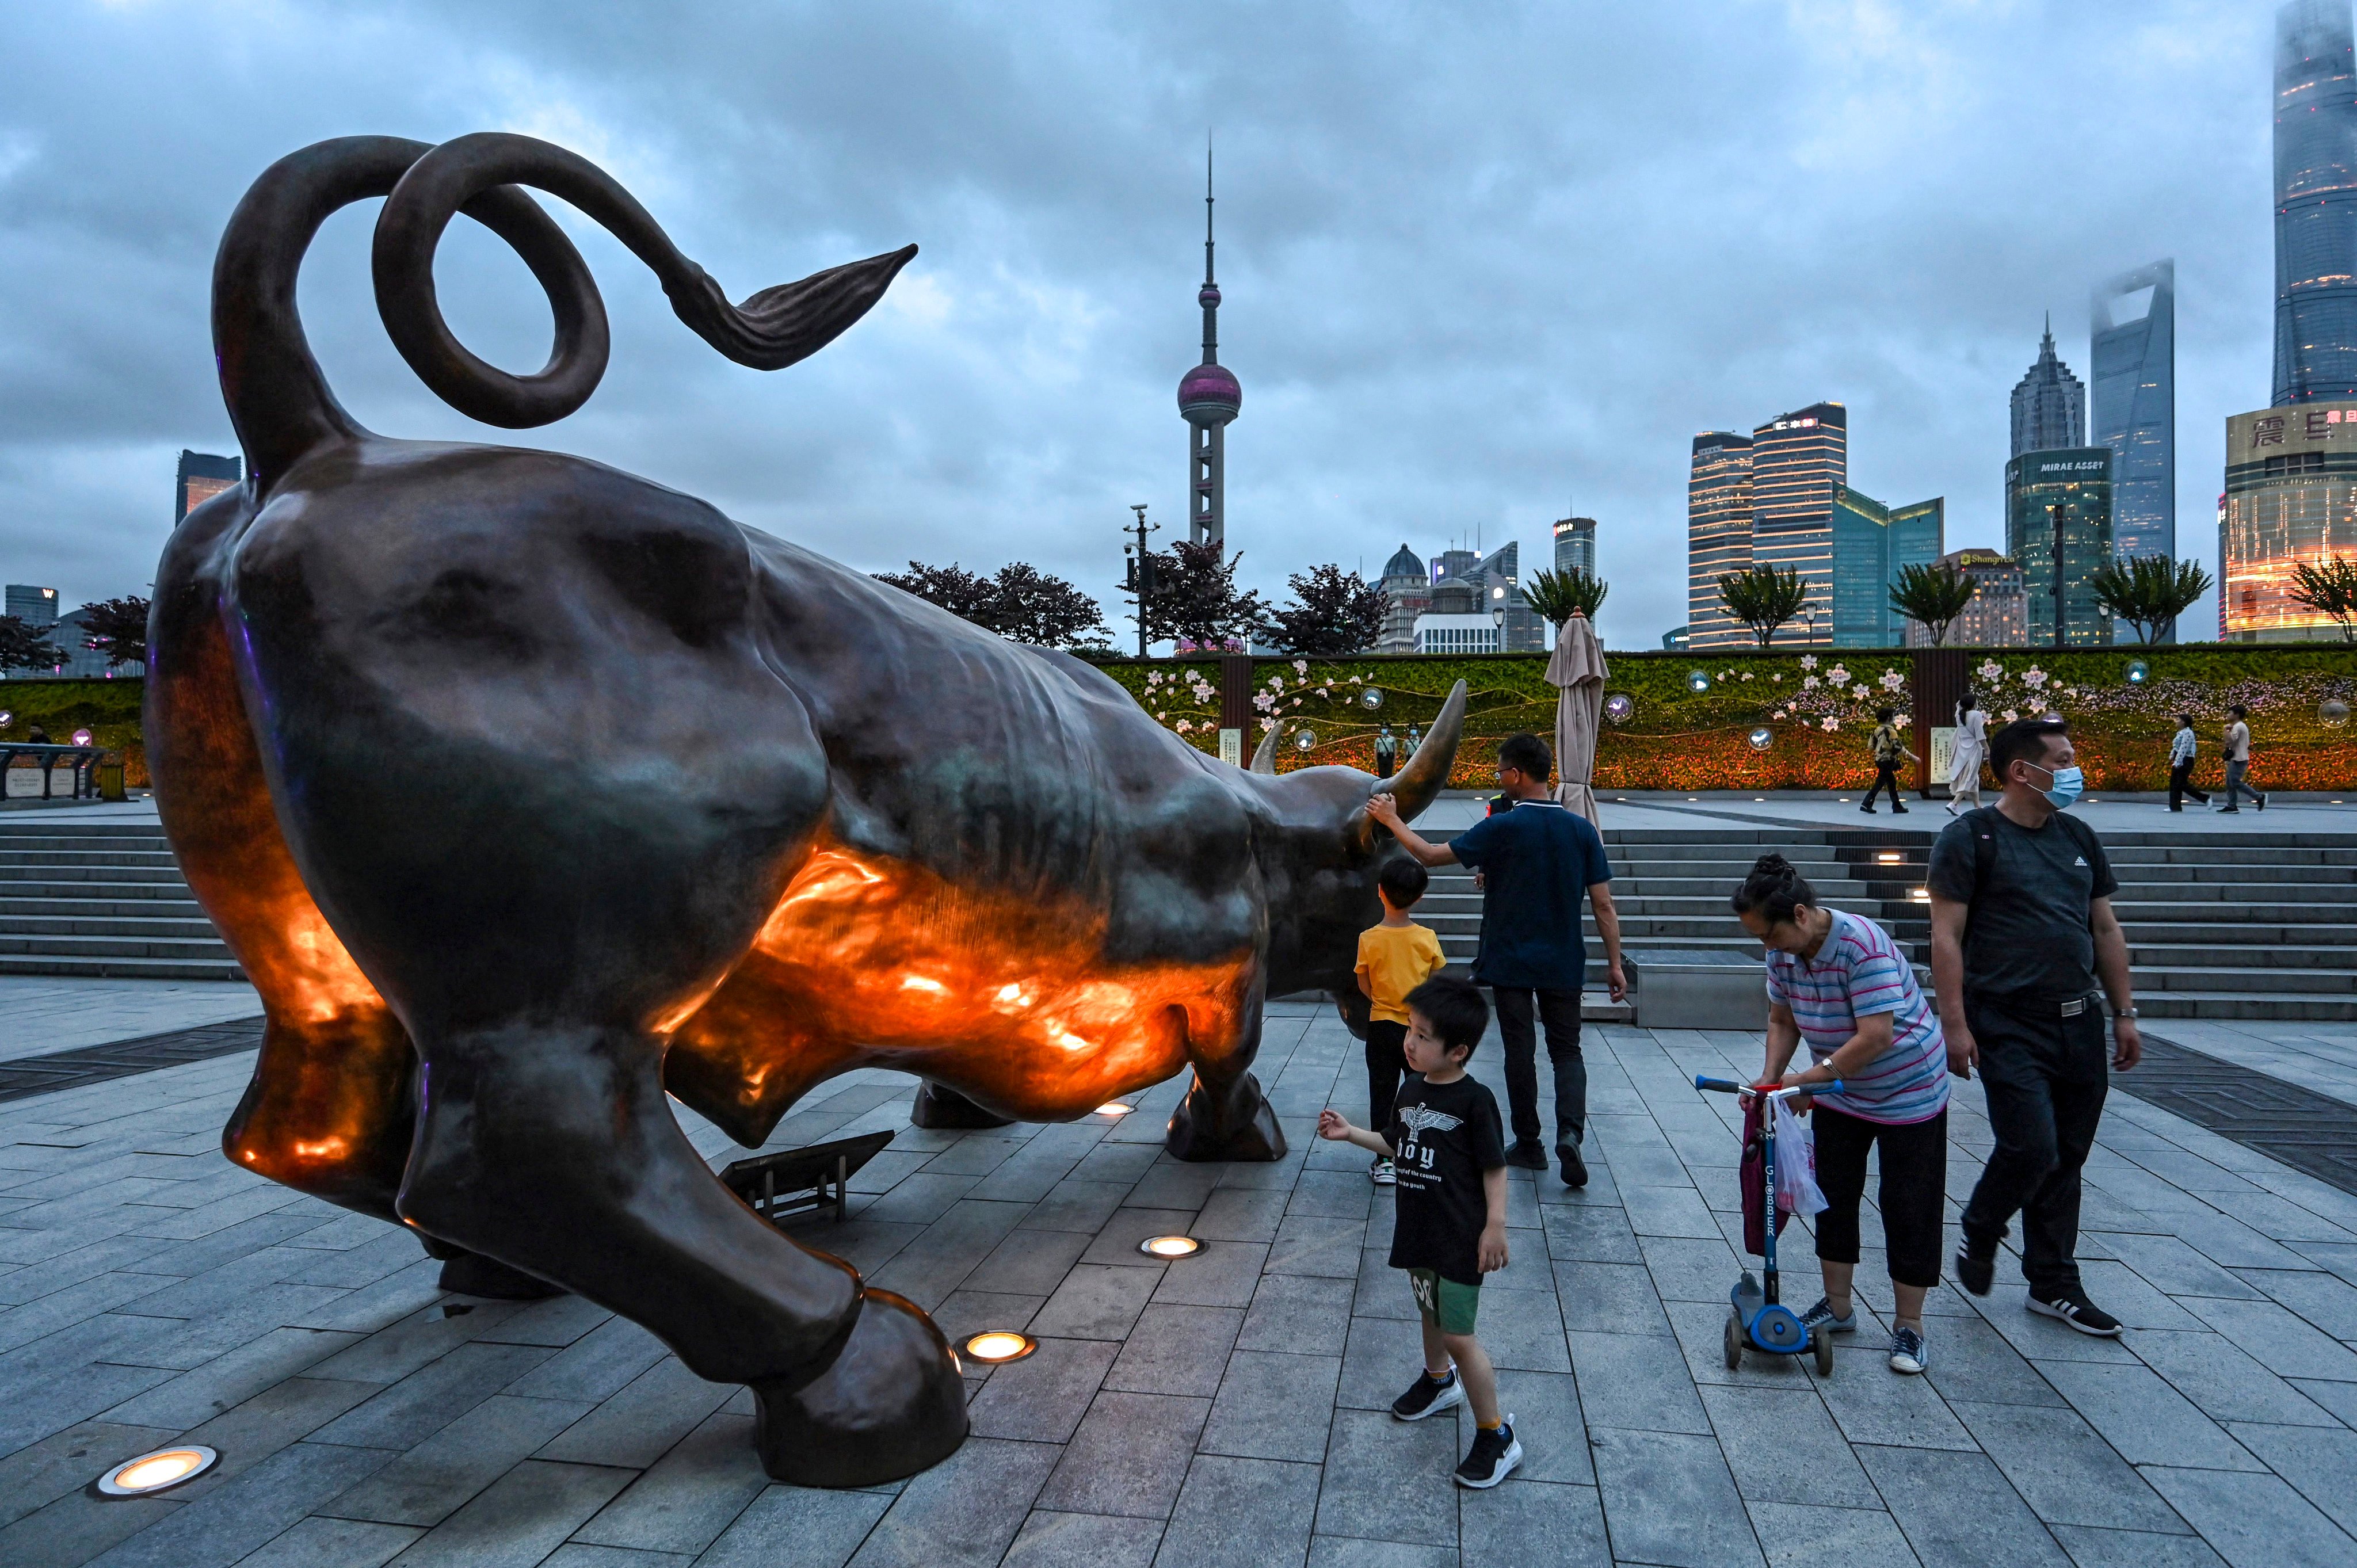 This photo taken on June 9, 2021 shows people standing next to the Bund Bull sculpture in Shanghai. Photo: AFP